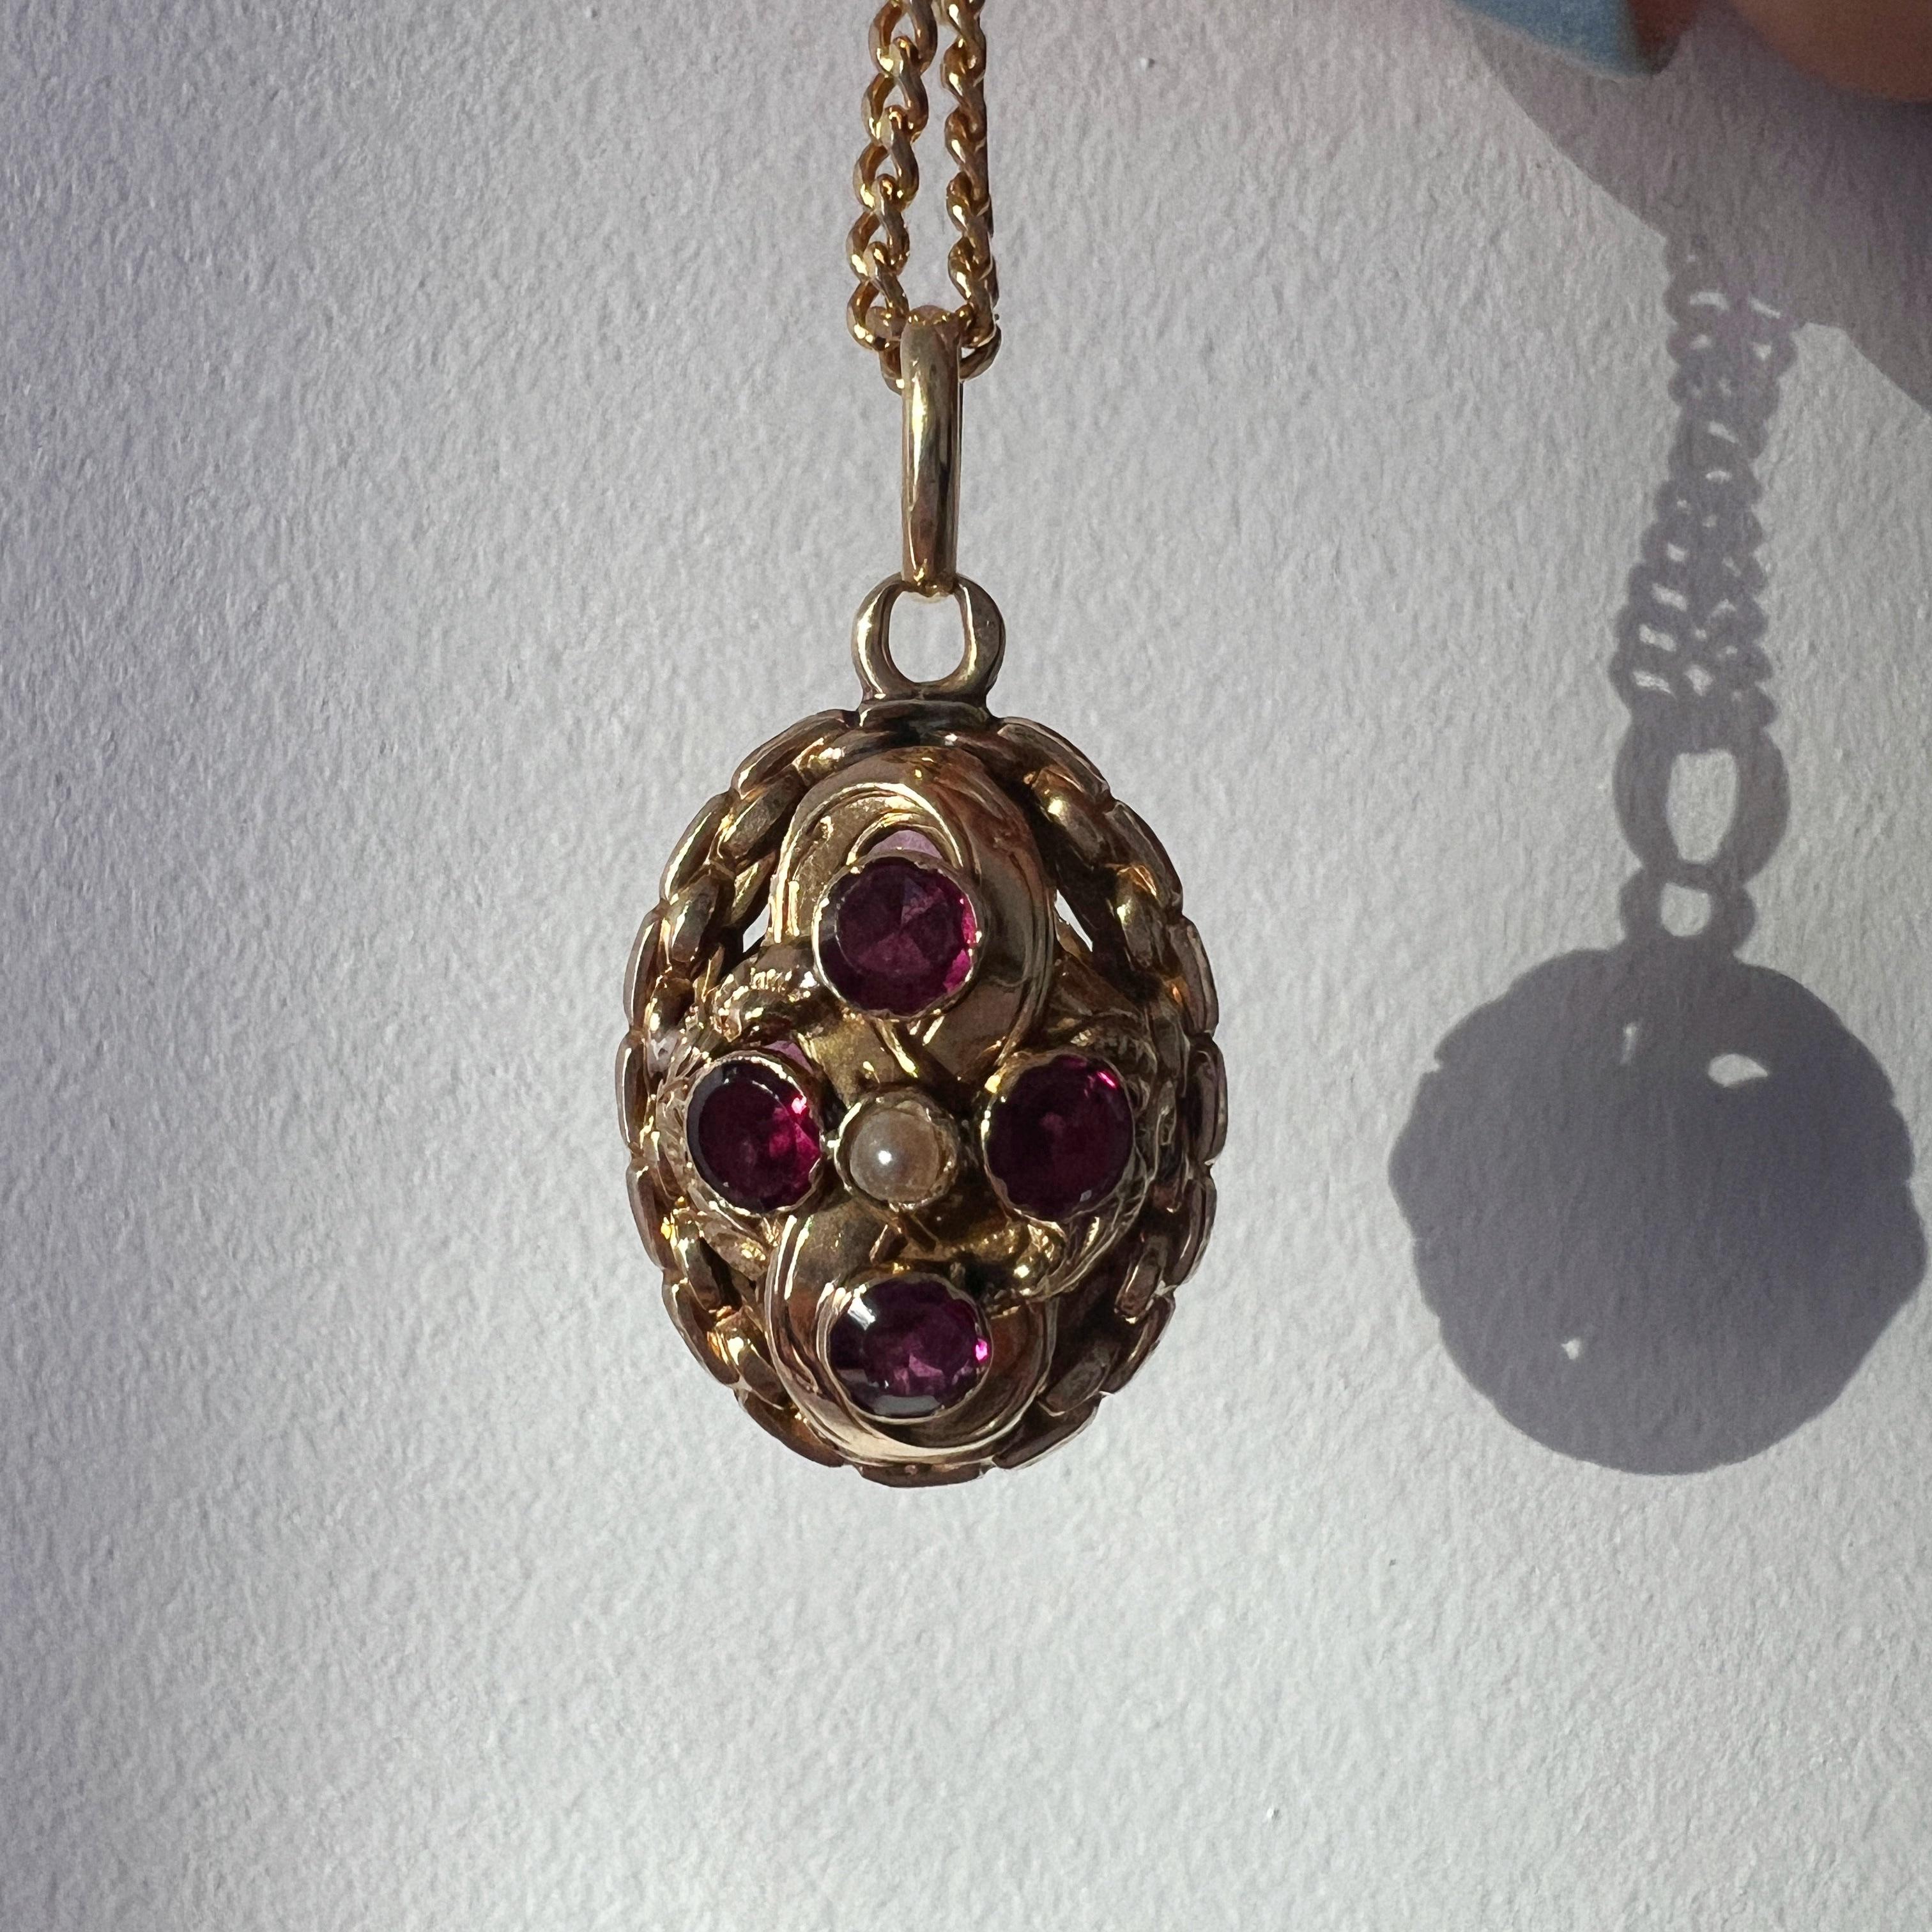 Antique French Victorian era 18K double sided garnet pendant For Sale 2